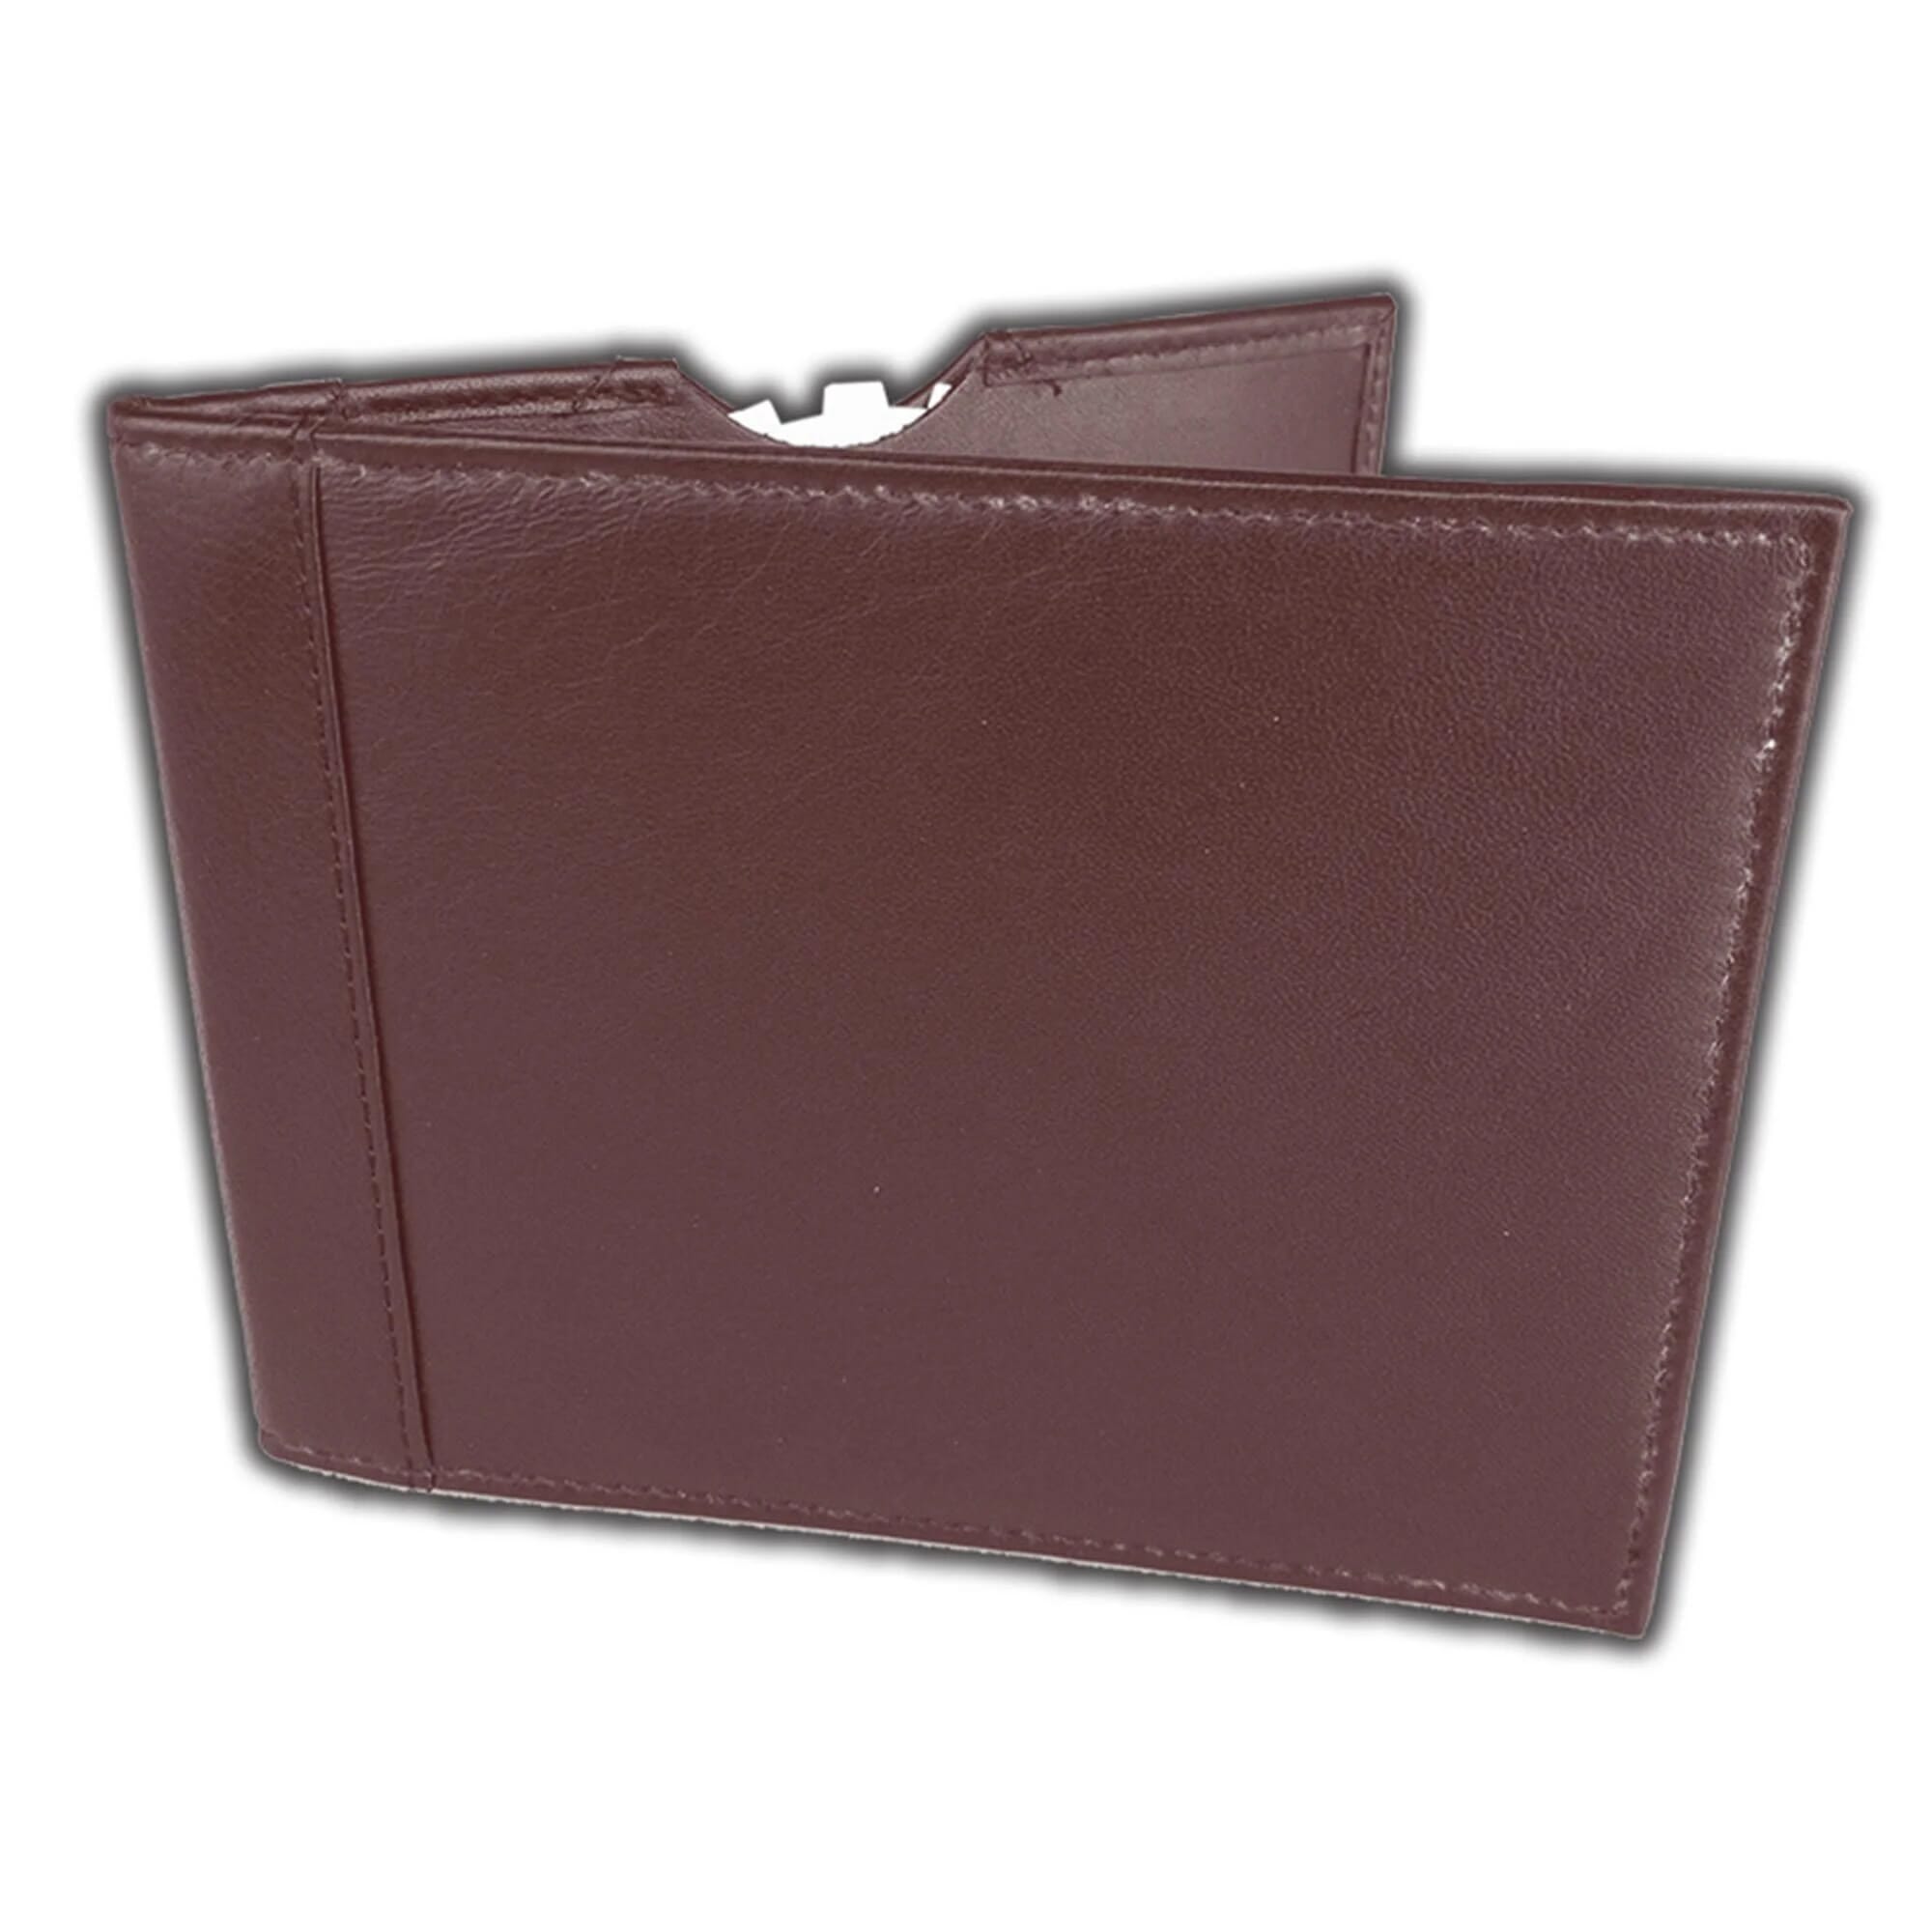 View Disabled Leather Park Wallet Brown information